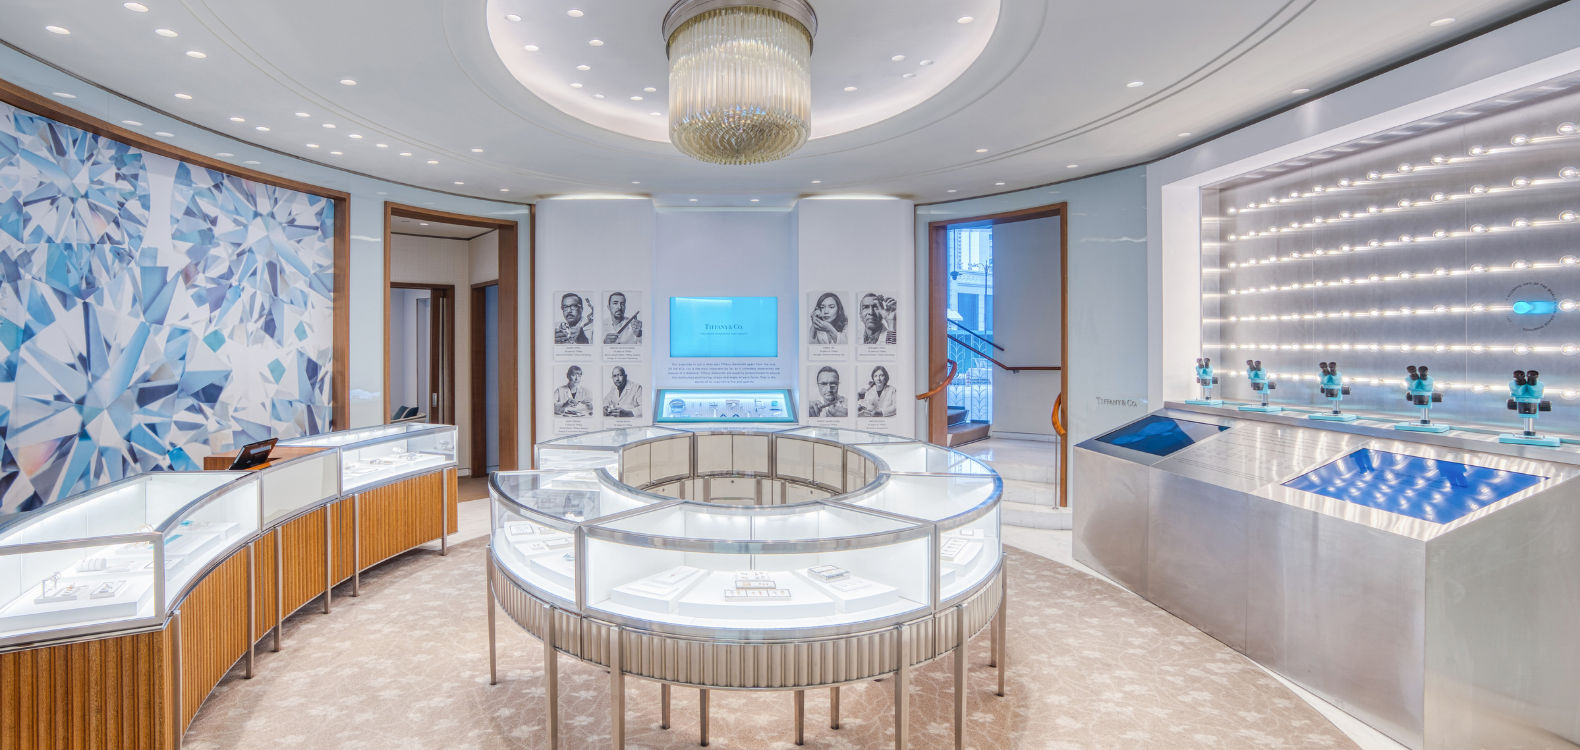 Learn about the 180 years of Tiffany & Co. at its flagship KLCC